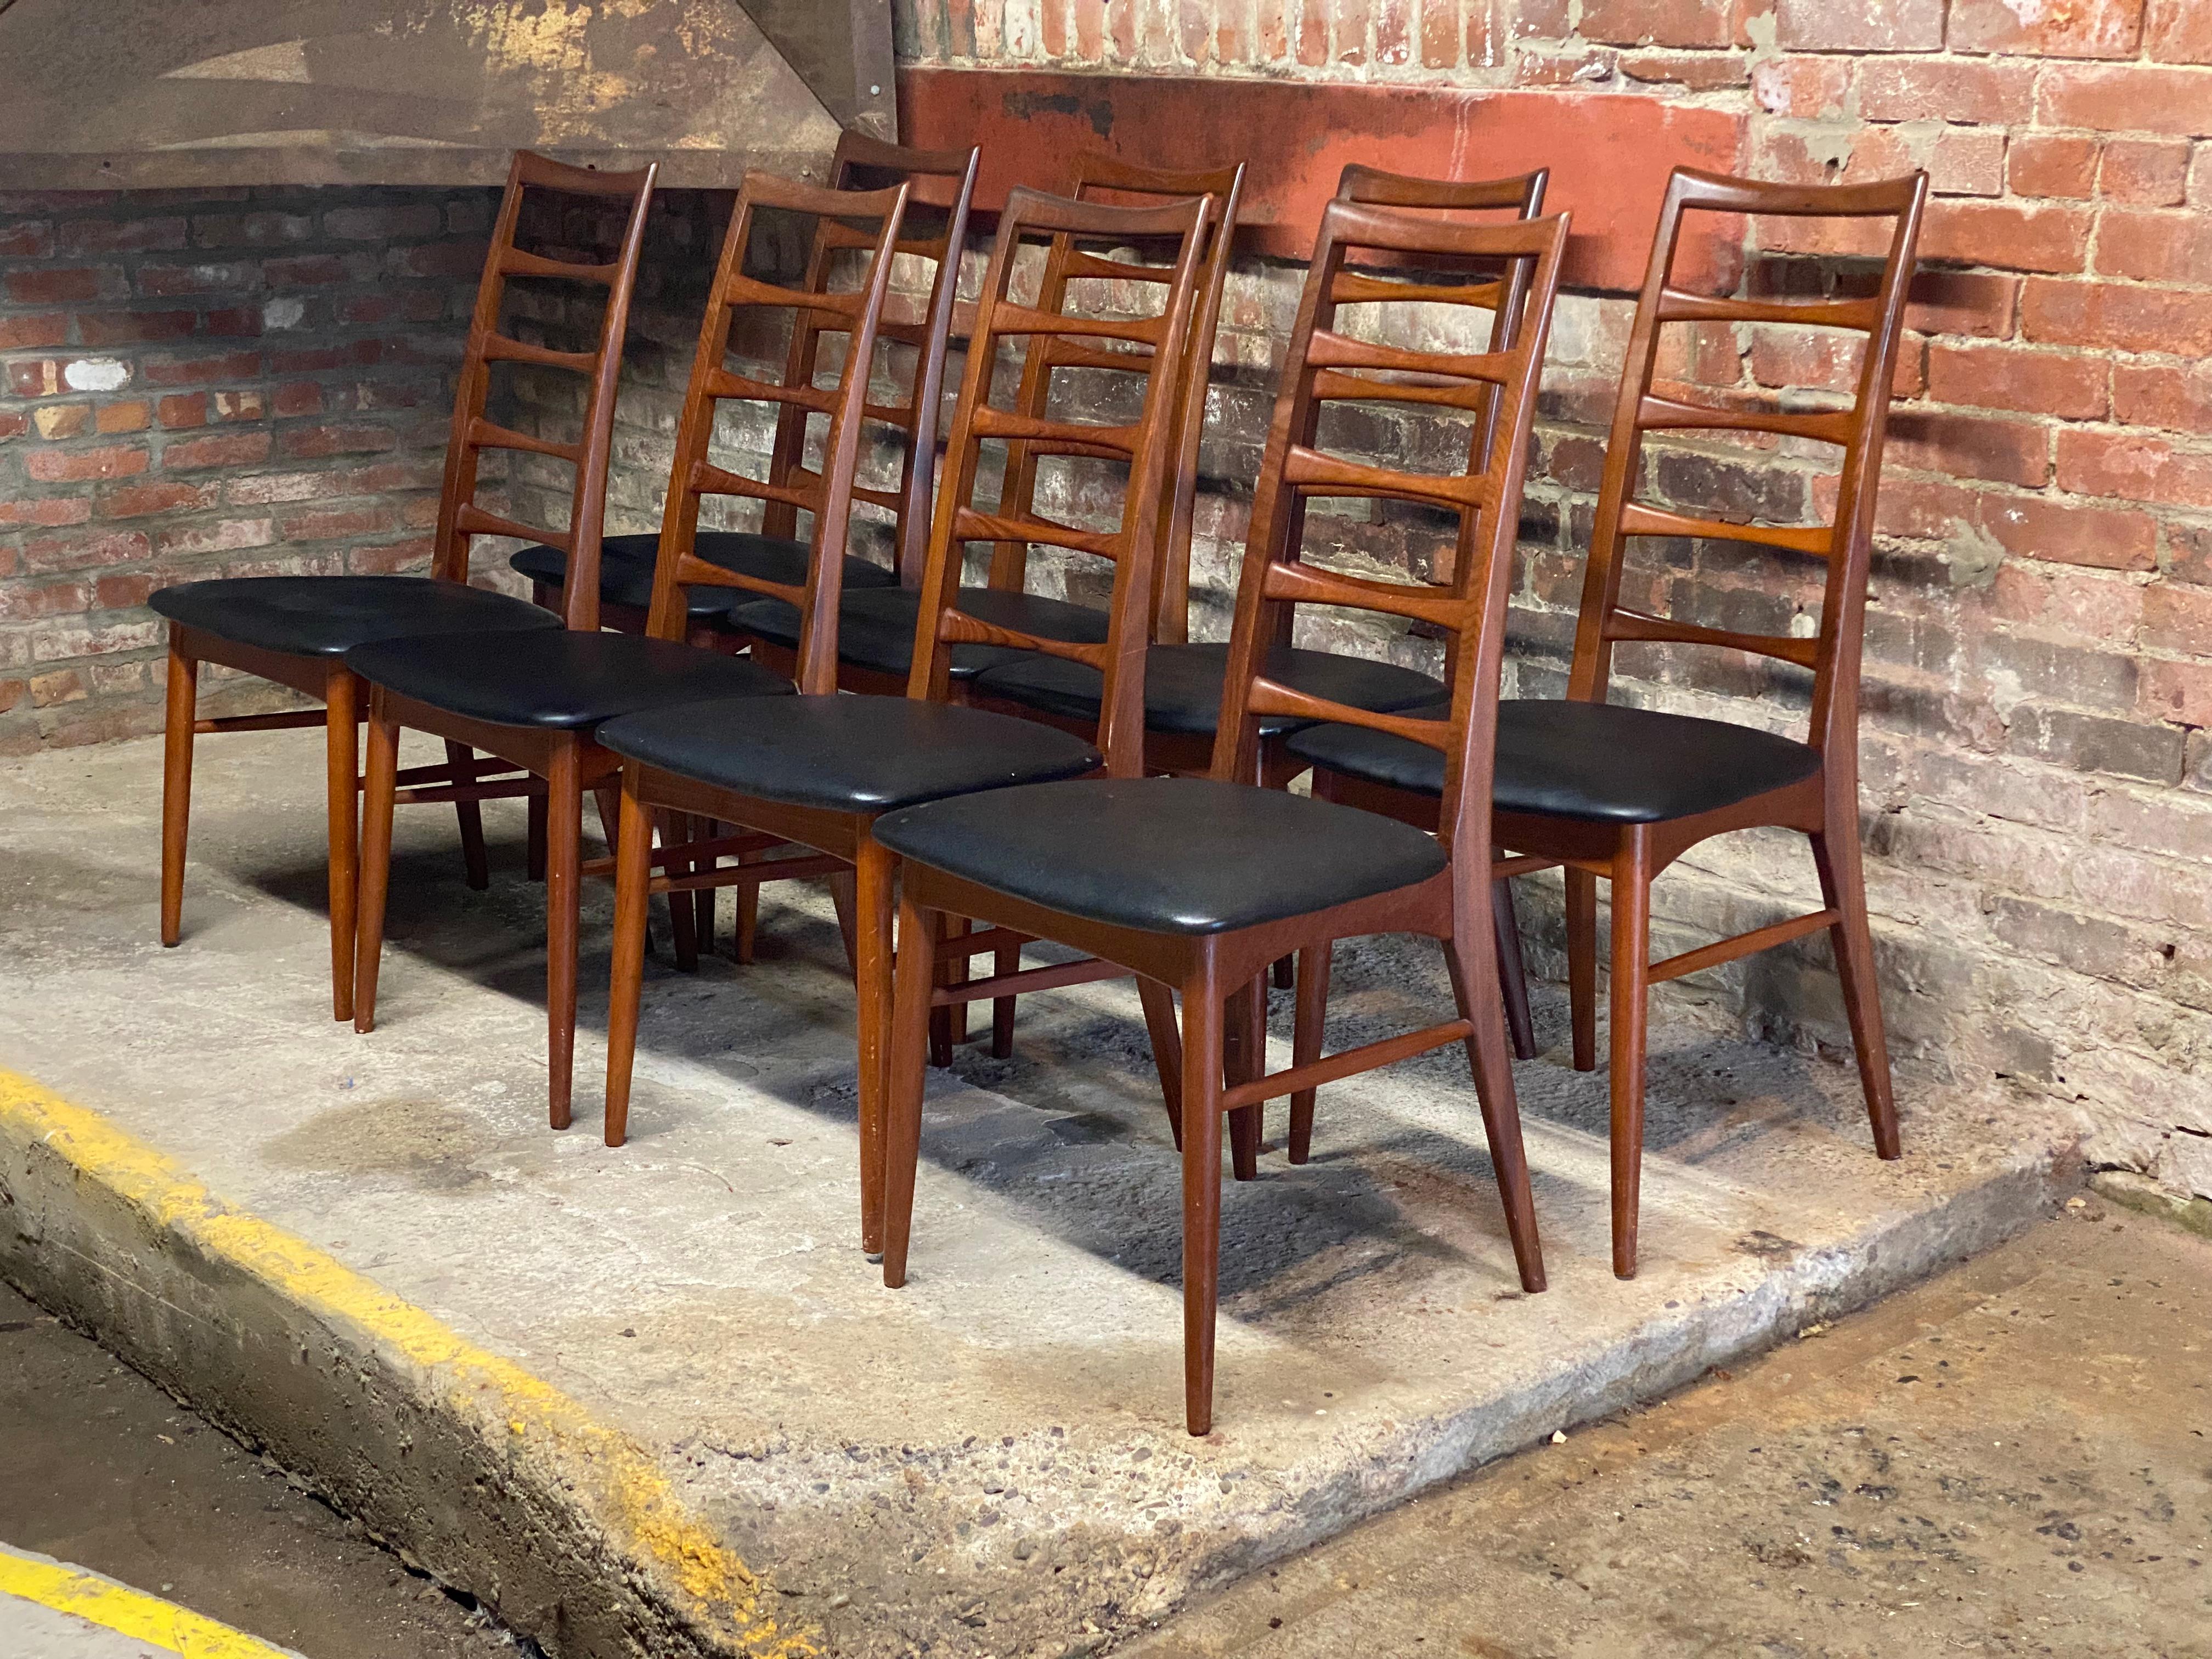 Set of eight Niels Koefoed for Koefoeds Hornslet Lis teak ladder back dining chairs. Beautiful and elegant arched ladder back chairs. Signed with Danish Control stamp and the original Bloomingdale's Bros. tag. Featuring tapered legs, stretcher